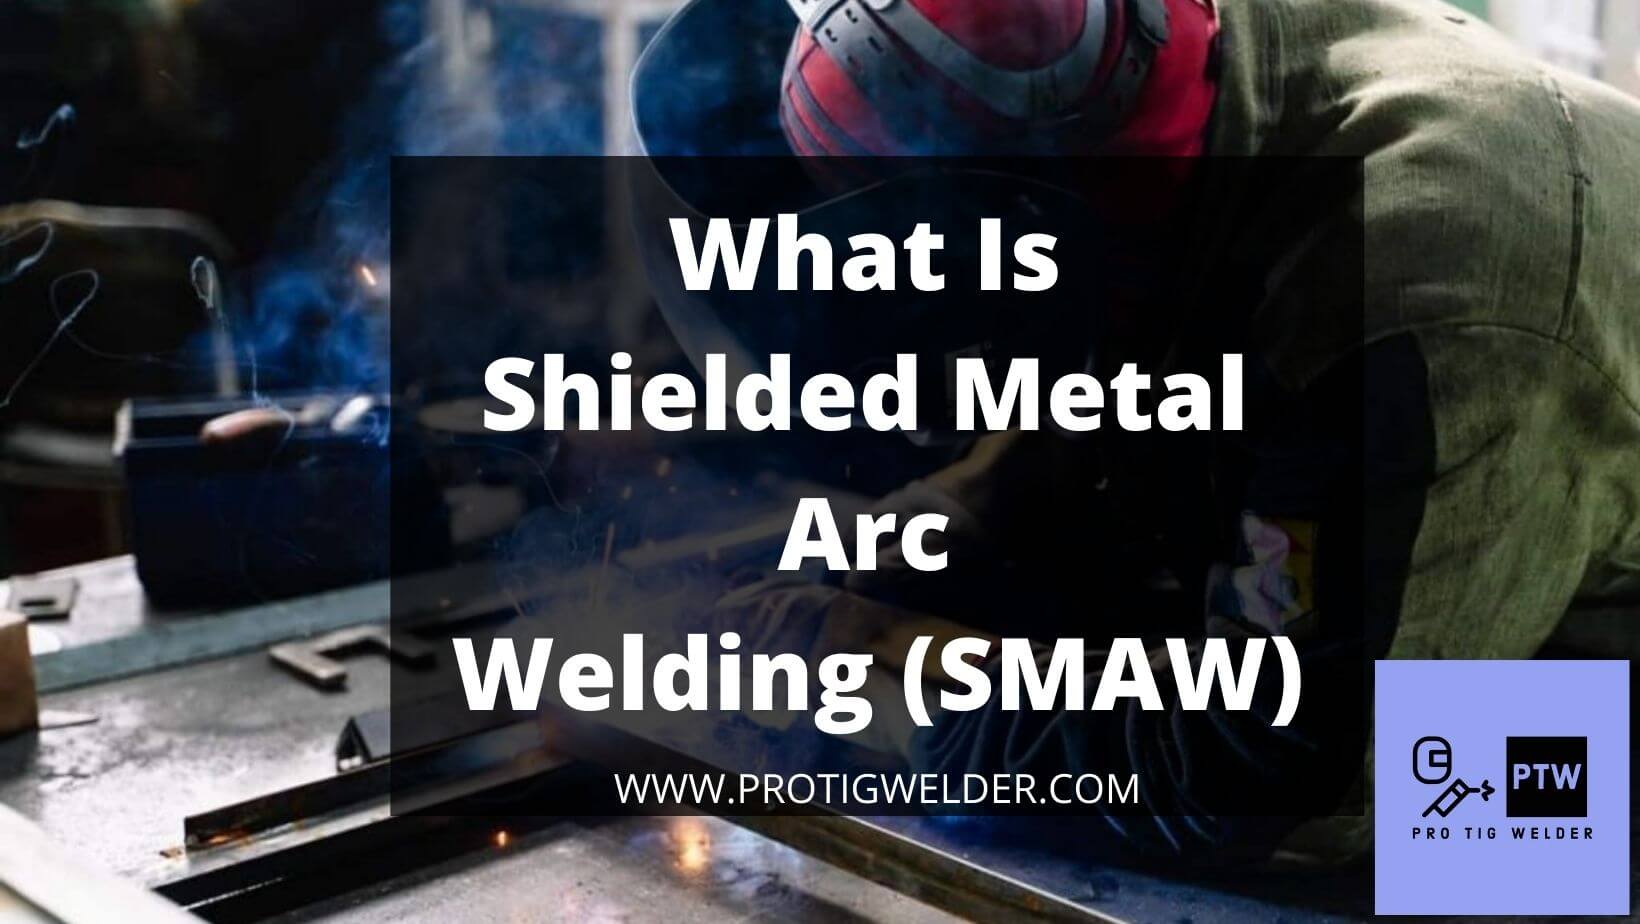 What Is Shielded Metal Arc Welding (SMAW)